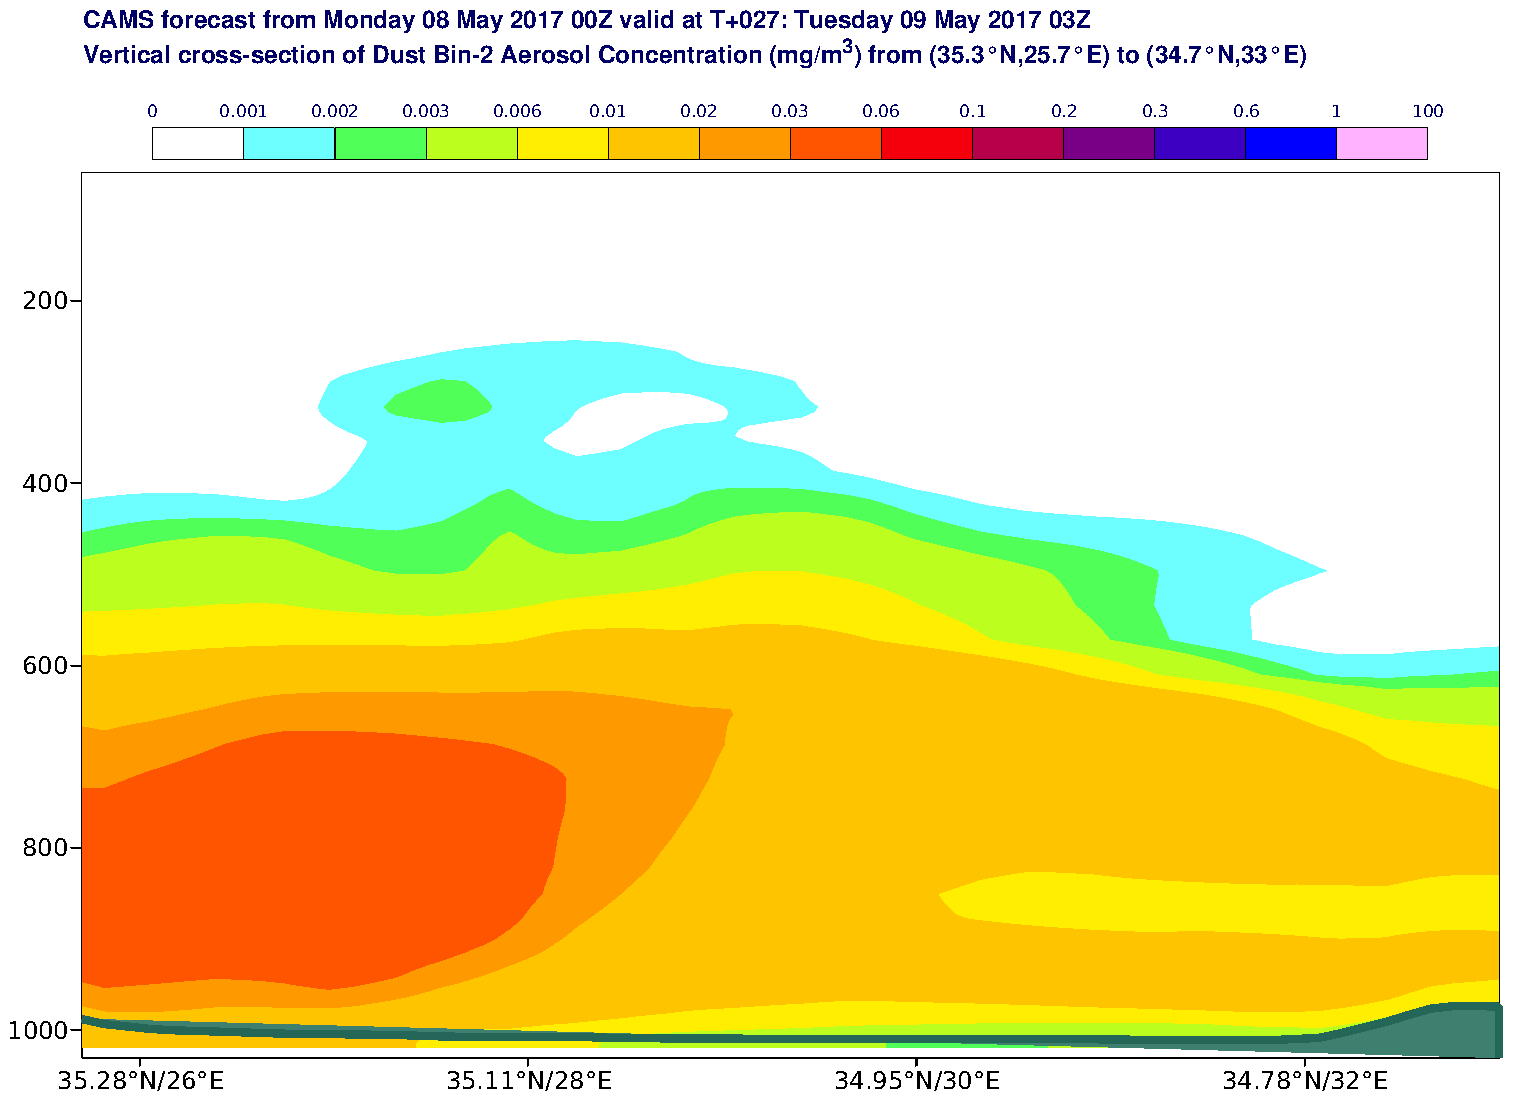 Vertical cross-section of Dust Bin-2 Aerosol Concentration (mg/m3) valid at T27 - 2017-05-09 03:00